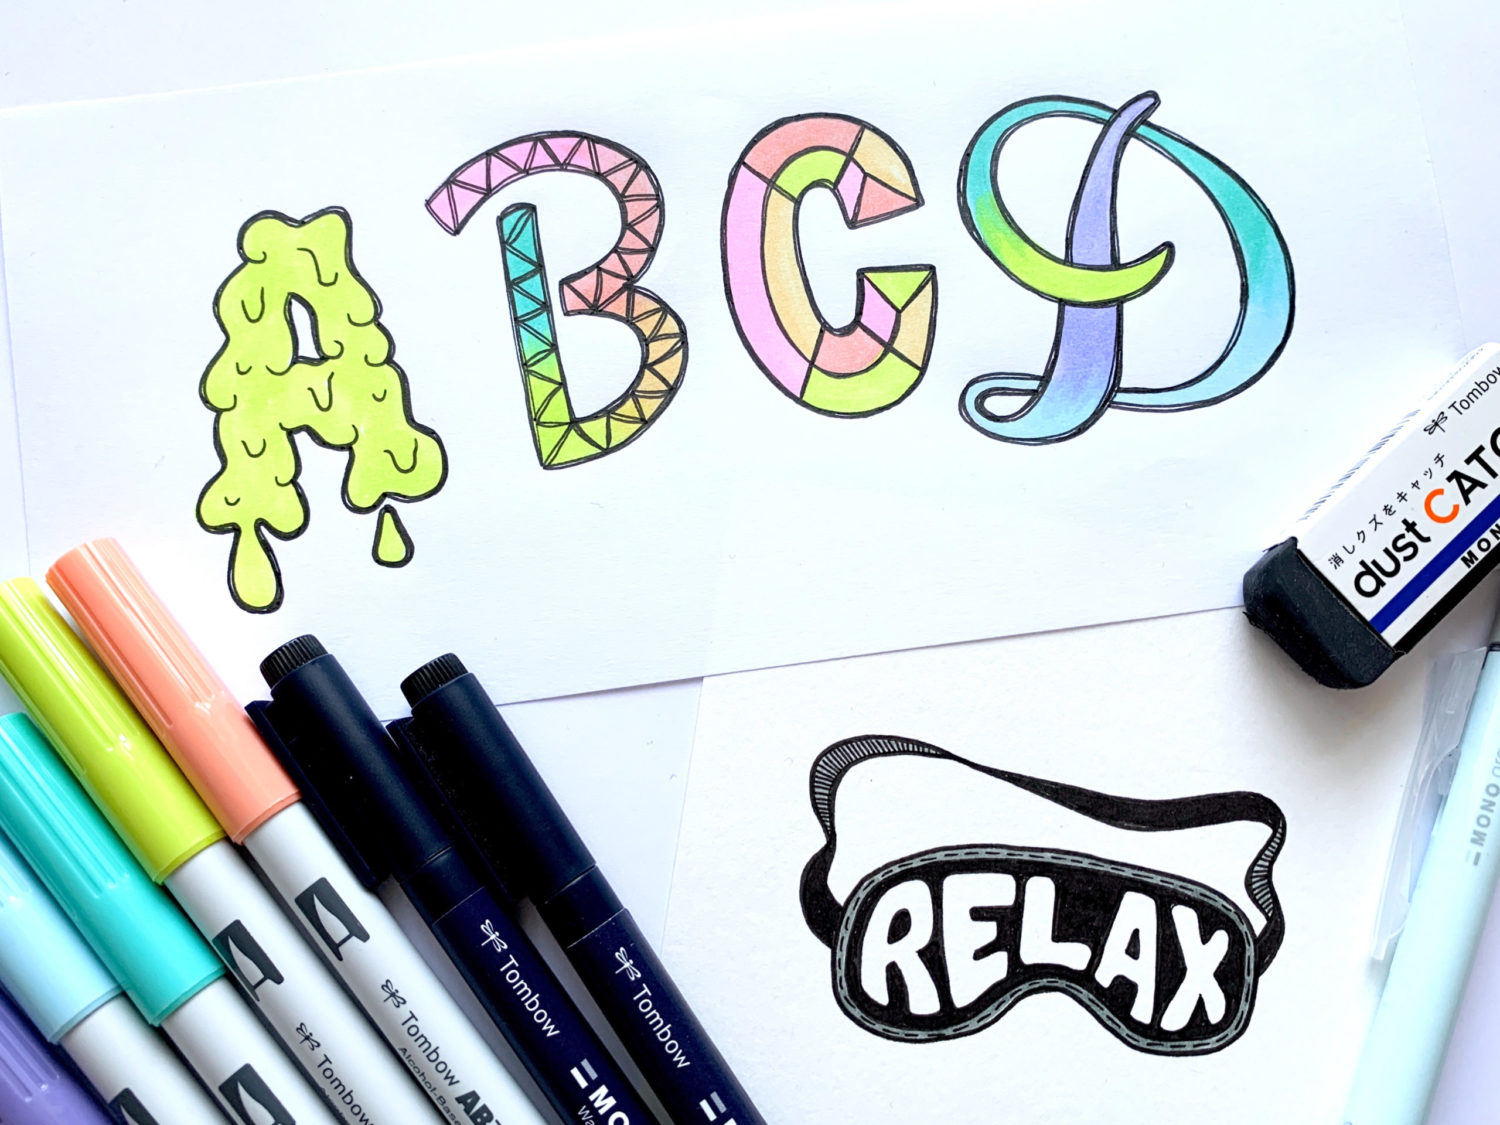 Lettering Marker Review: Crayola or Tombow? – Ray of Light Design